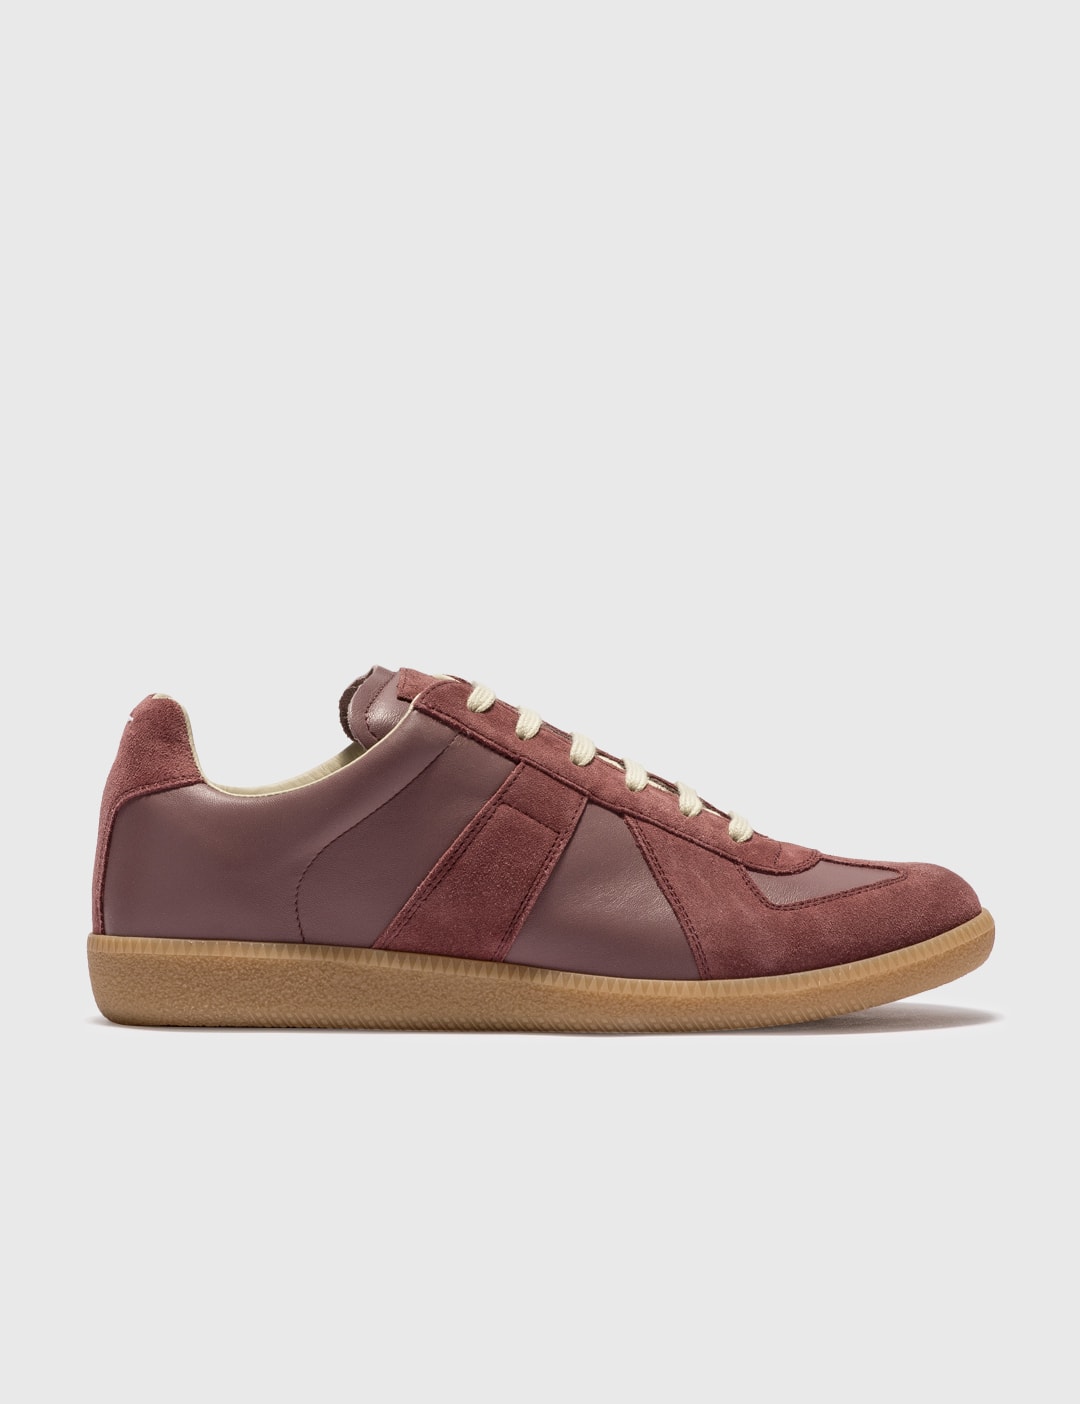 REPLICA SNEAKERS Placeholder Image